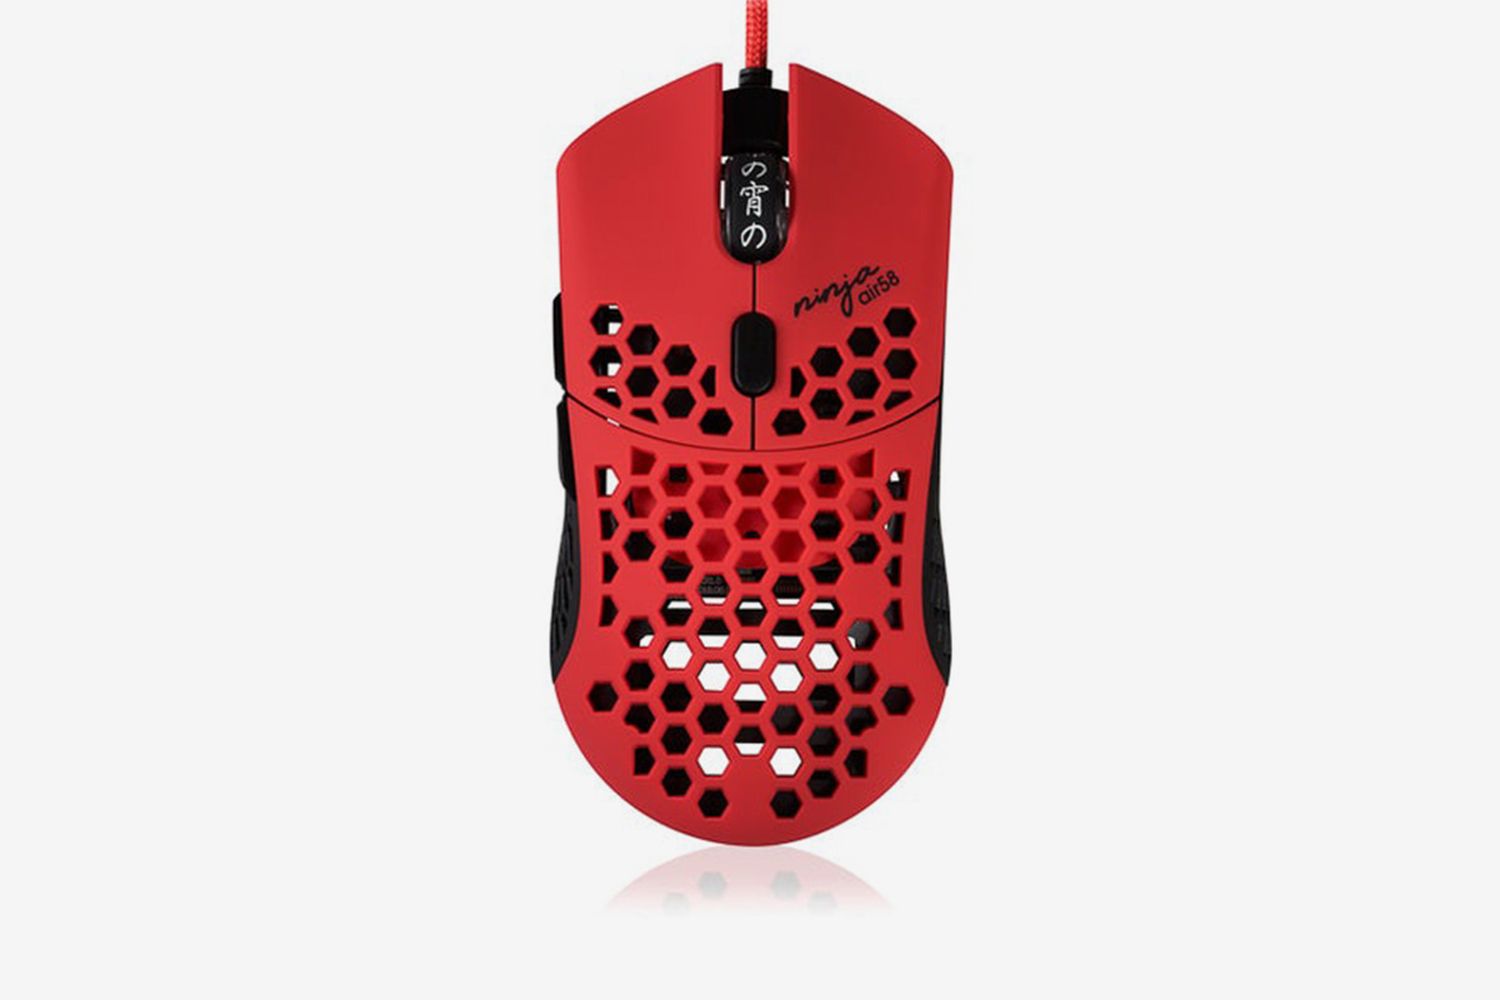 Slovenia Commander radiator Shop the Best Finalmouse Gaming Mouse Here